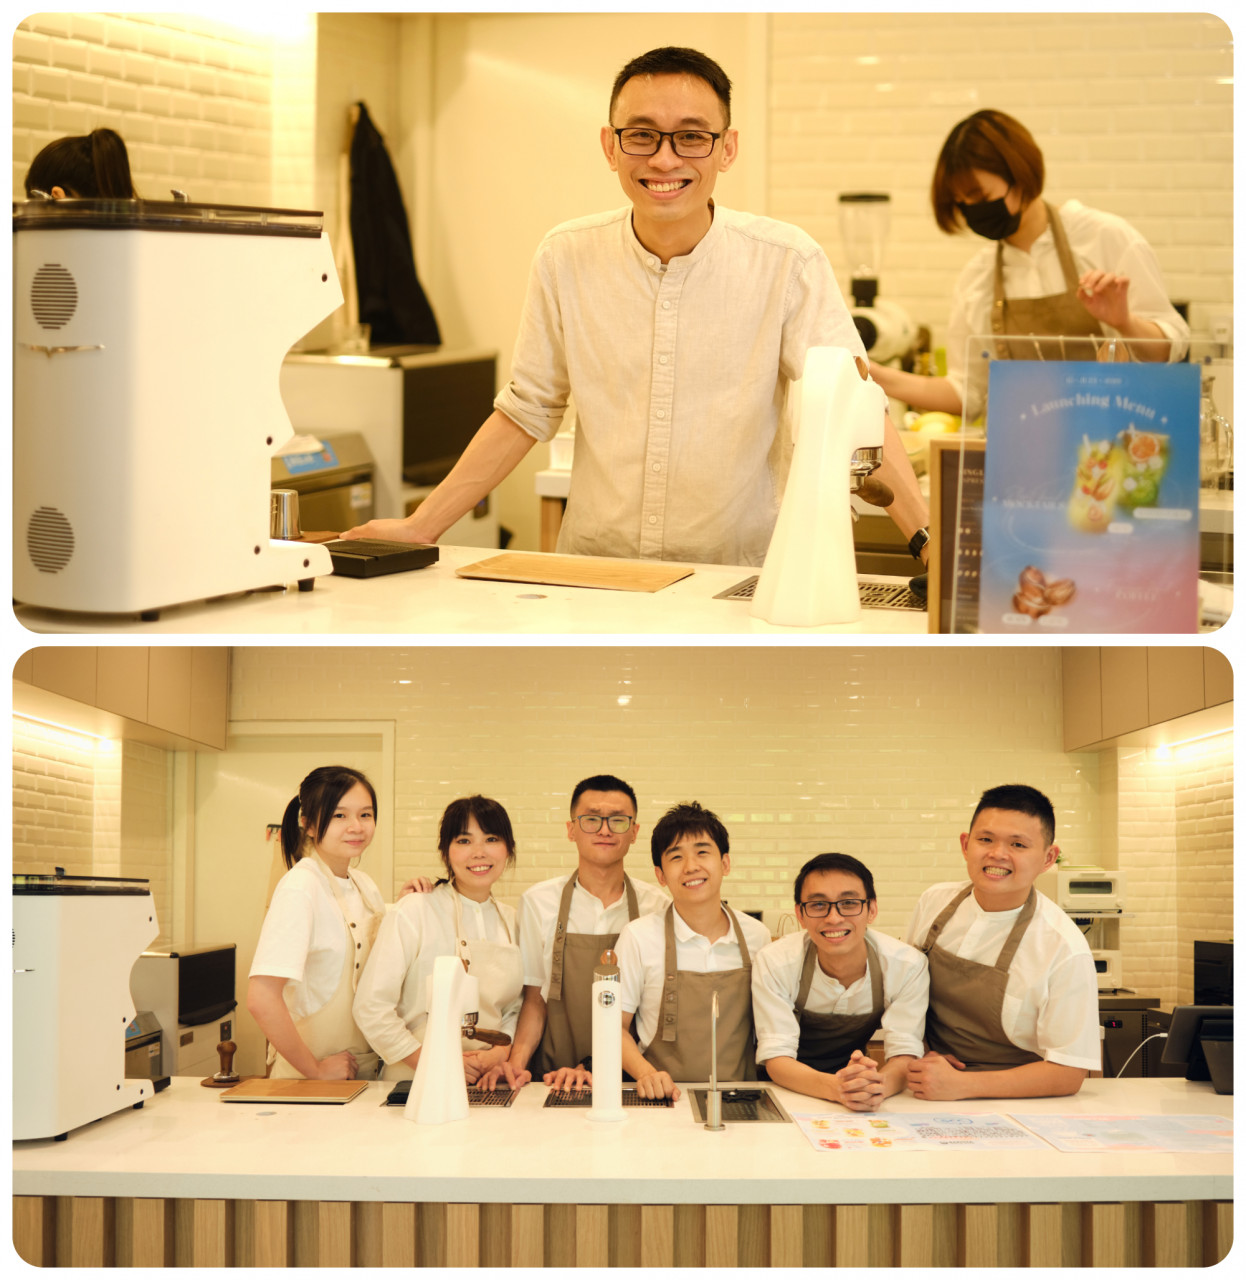 (Top) Barista Guild Asia co-founder and director David Leong. (Bottom) Signature Market co-founder John Cheng with SEE Cafe baristas. – Pic courtesy of SEE Cafe by Signature Market